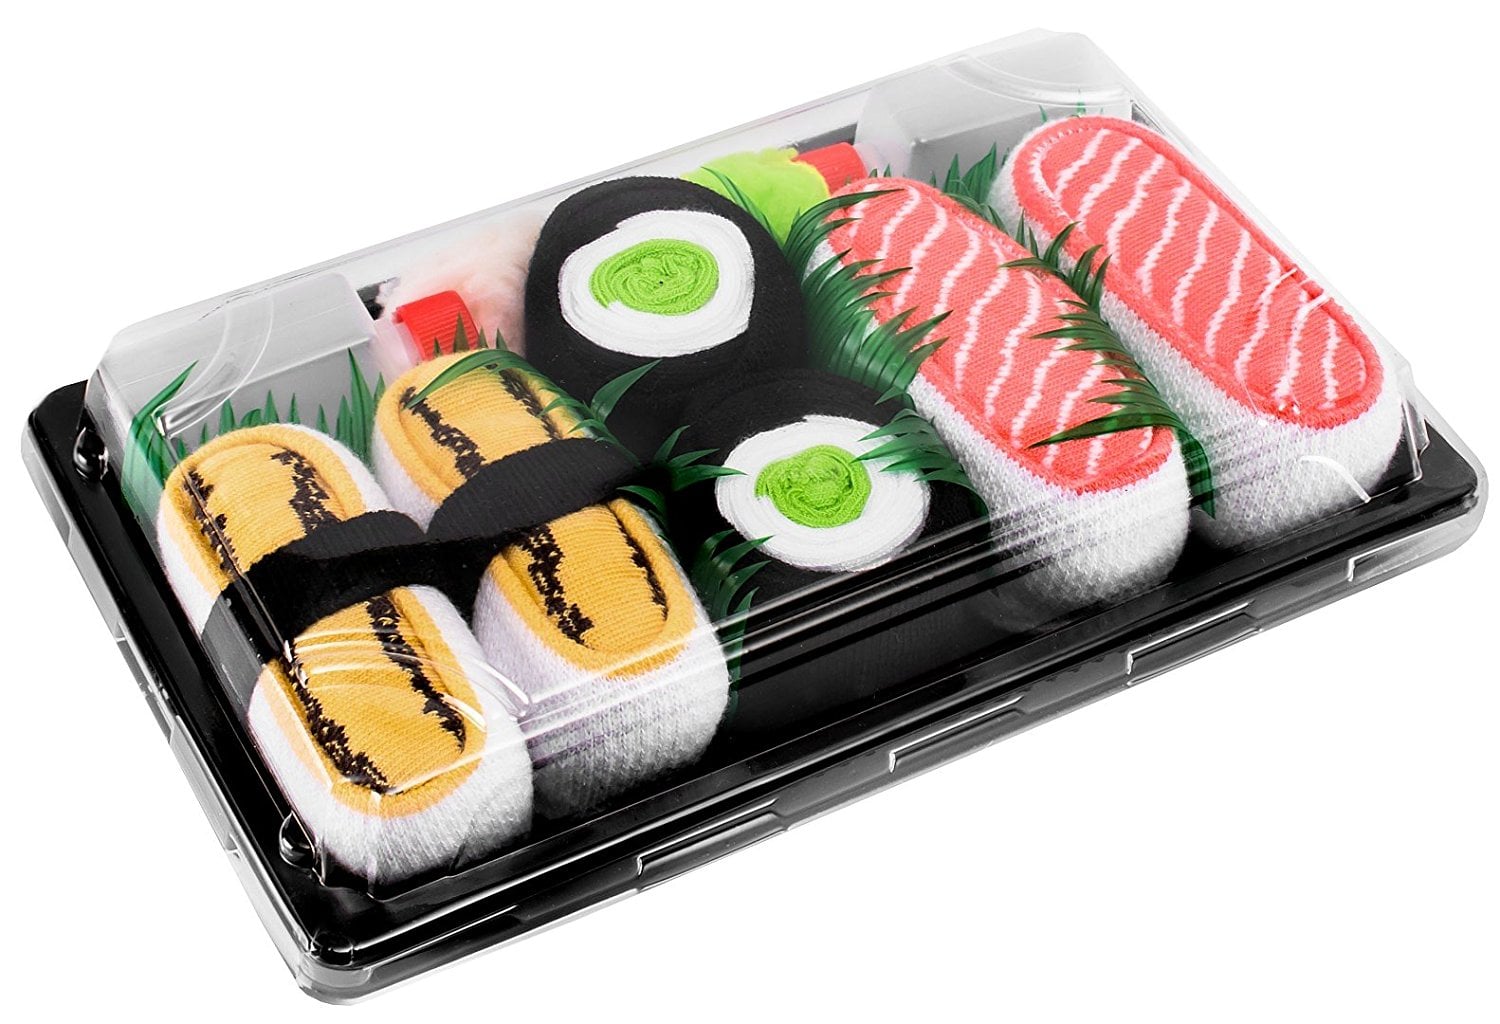 Top 10 Gifts for Sushi Lovers